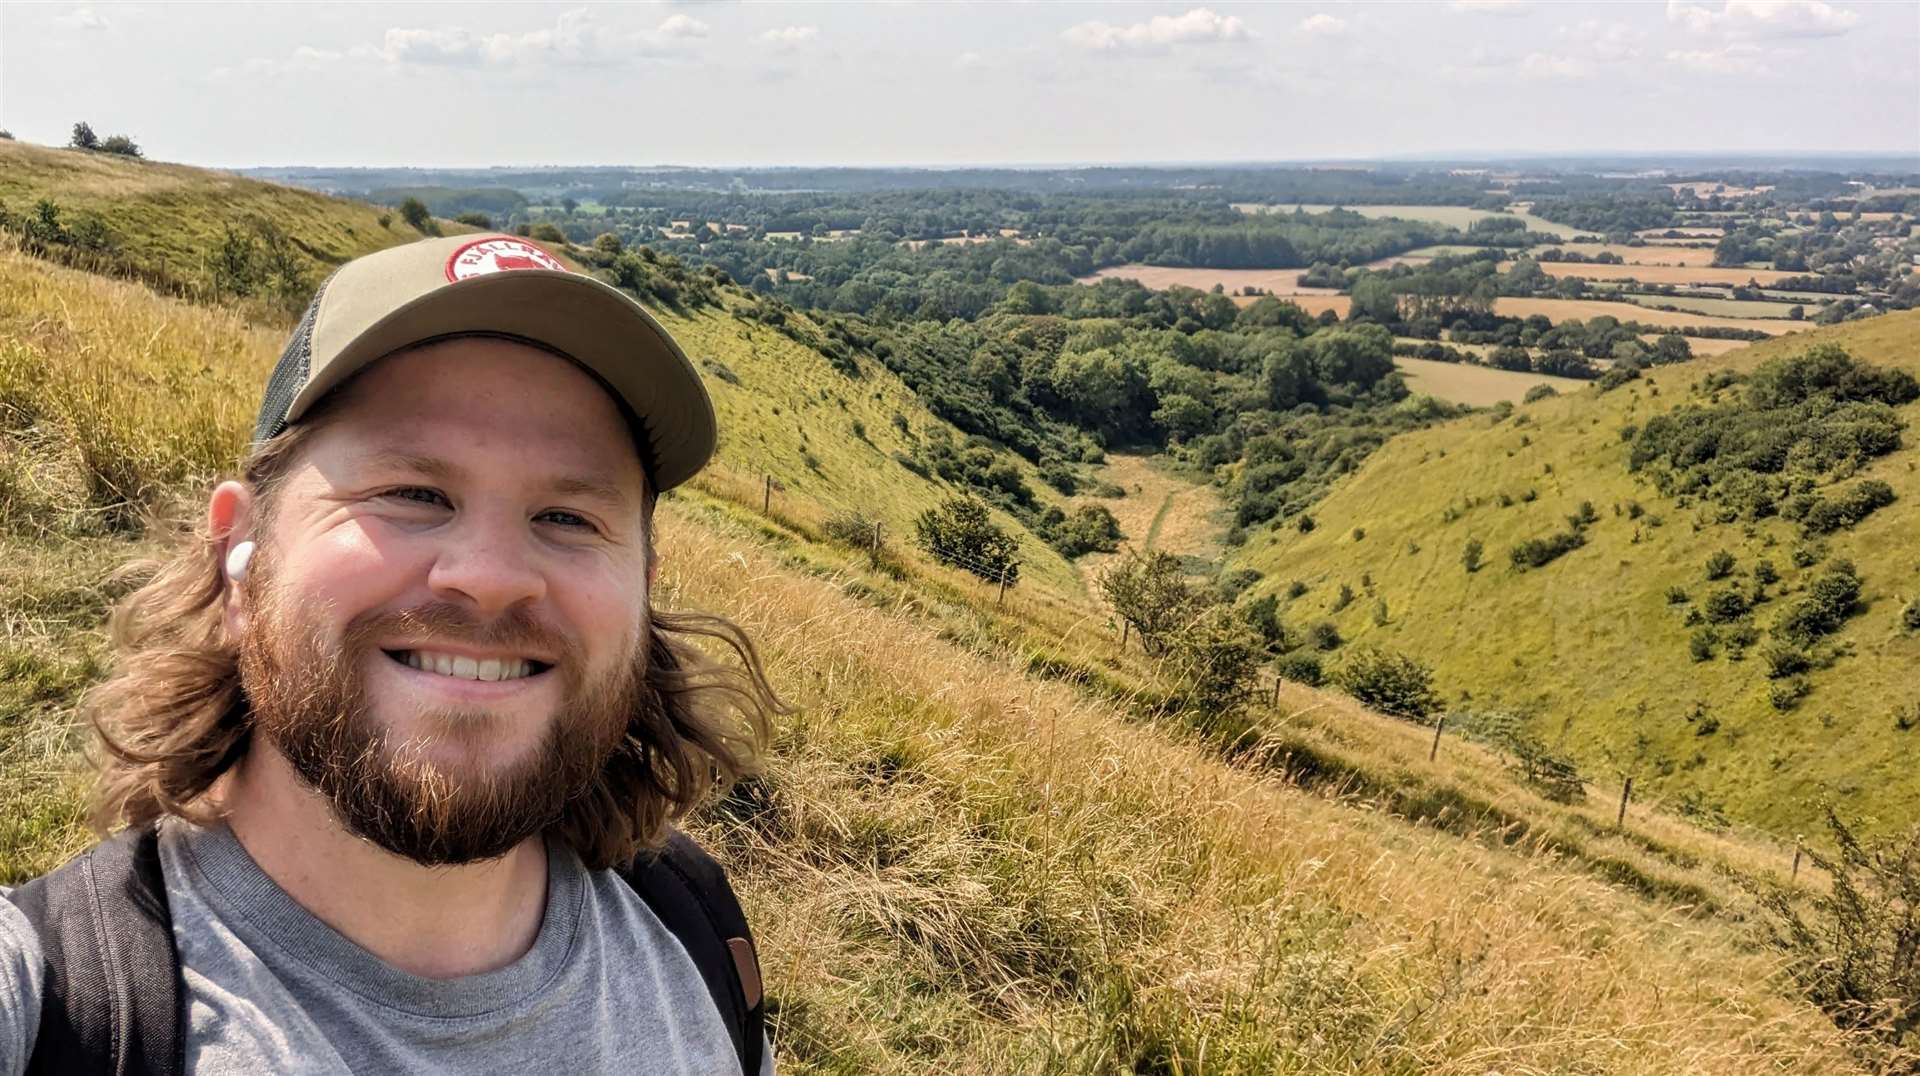 Our man Rhys Griffiths enjoying the remarkable views from the Downs outside Wye